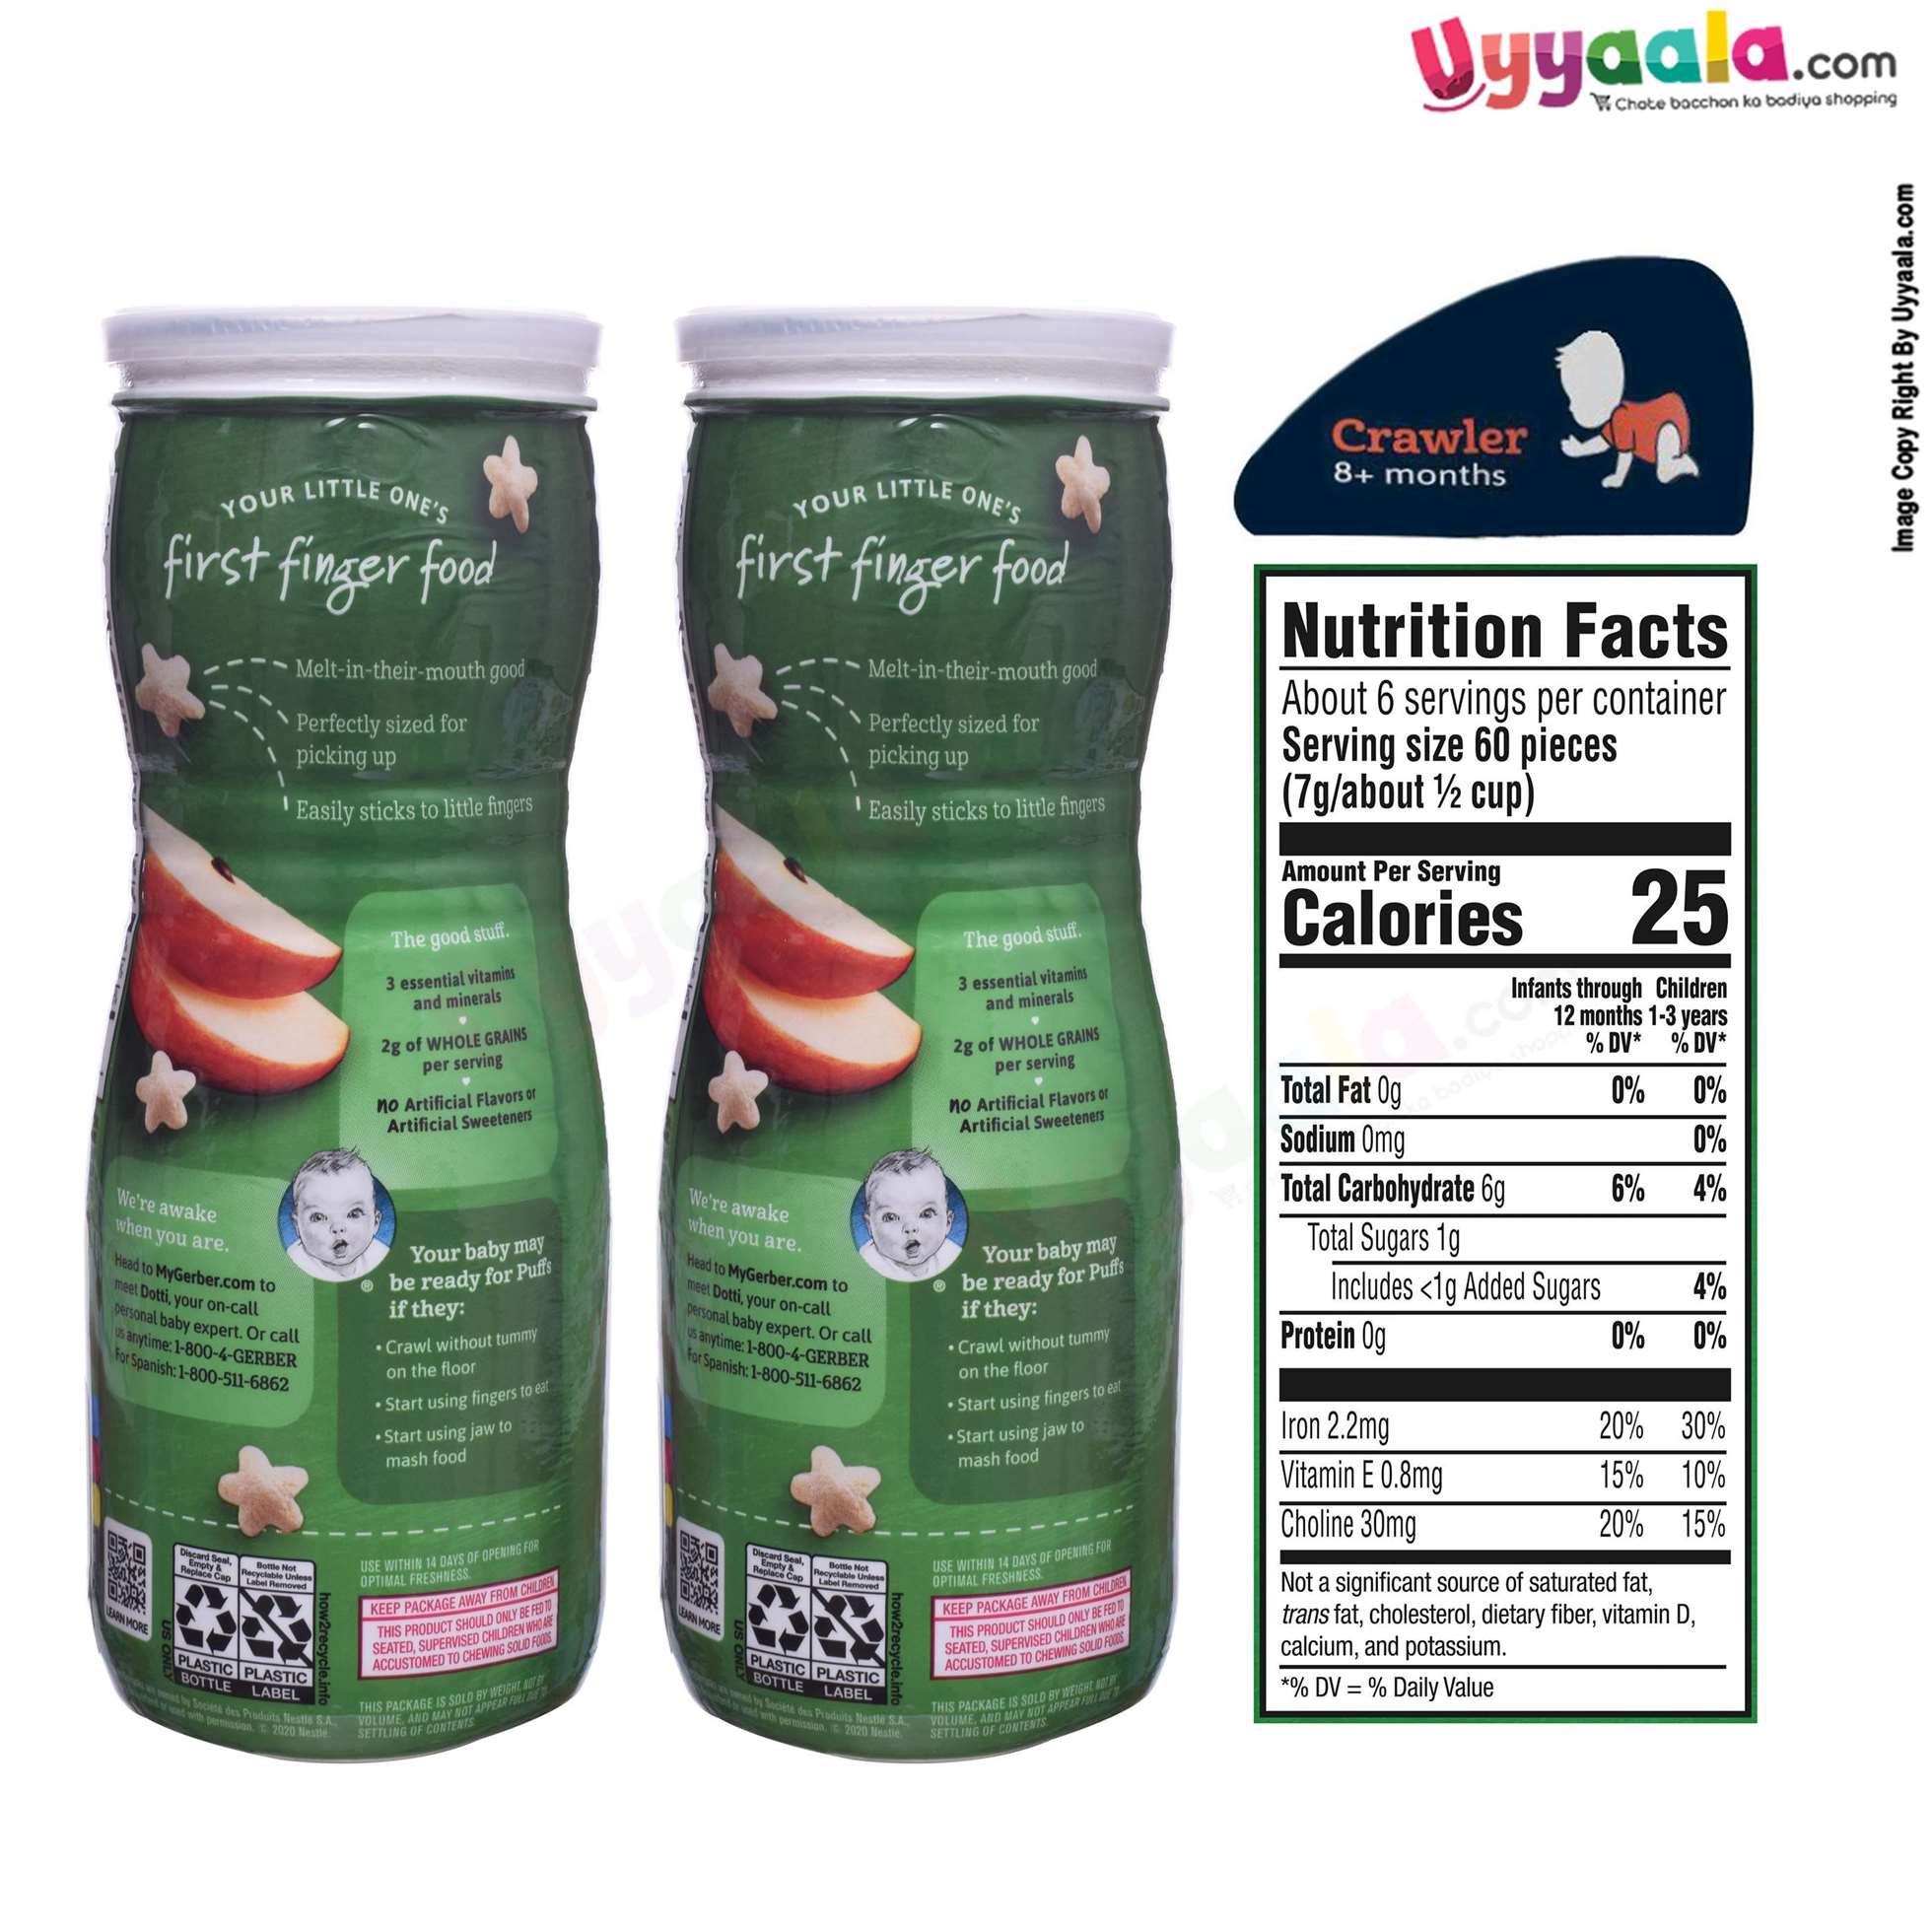 GERBER Organic puffs - apple, naturally flavored baby snack, pack of 2 (42g each) - 8 months +